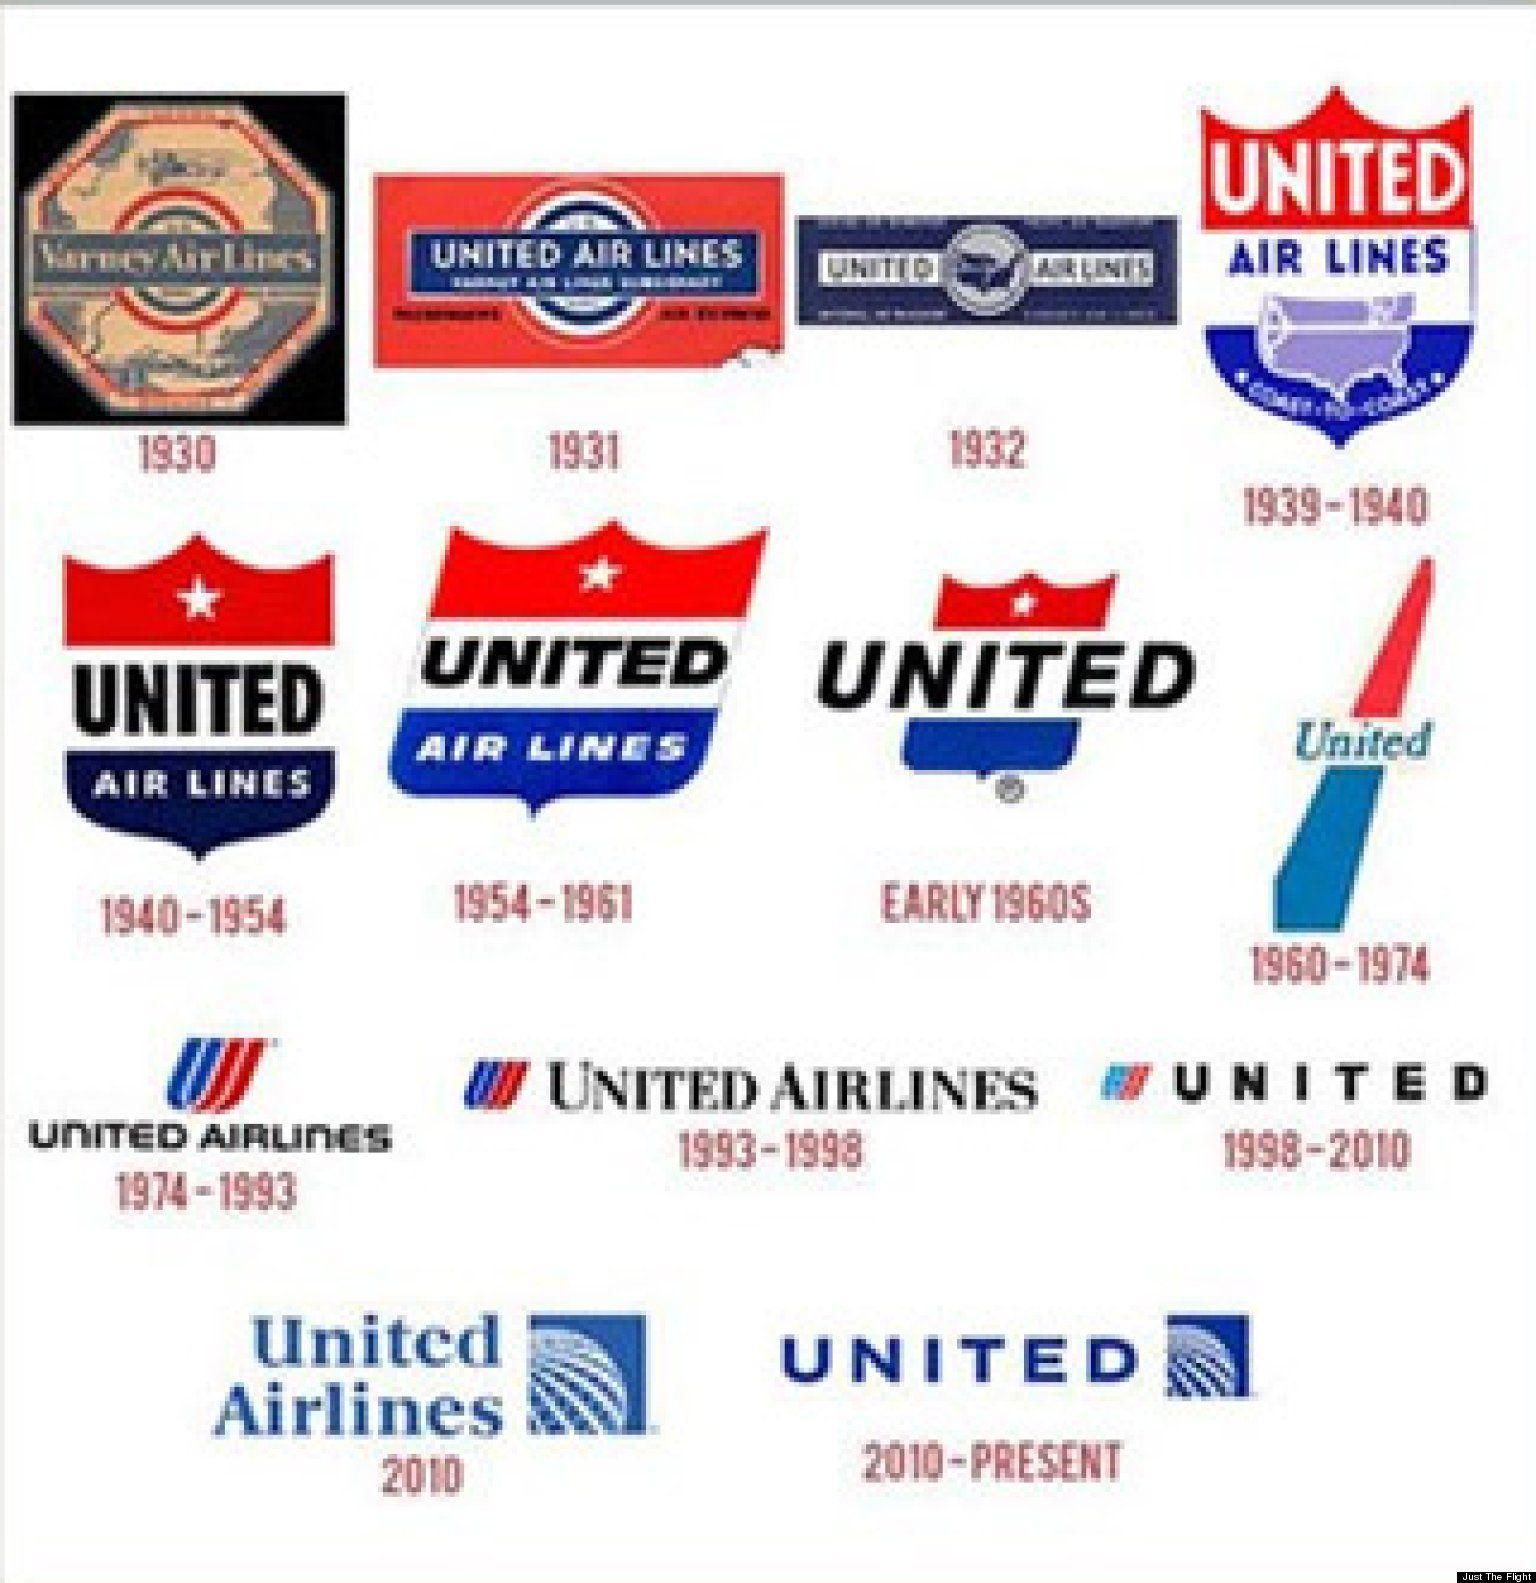 United Old Logo - airline logos and names - Kleo.wagenaardentistry.com